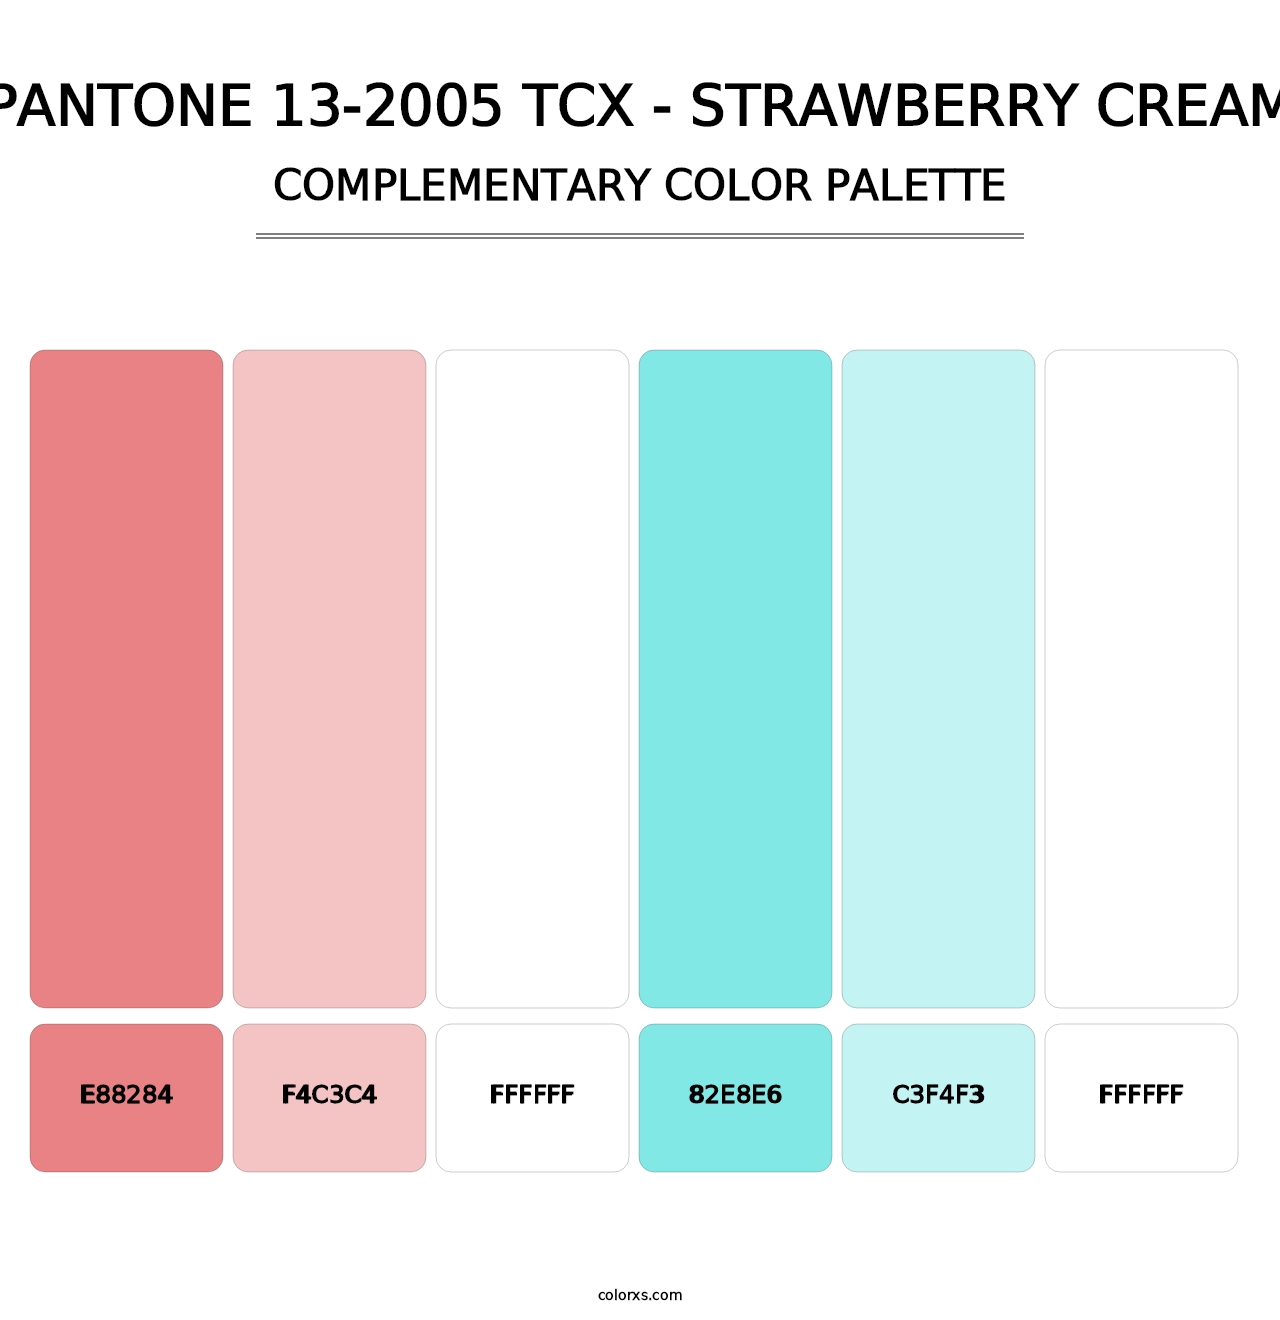 PANTONE 13-2005 TCX - Strawberry Cream - Complementary Color Palette